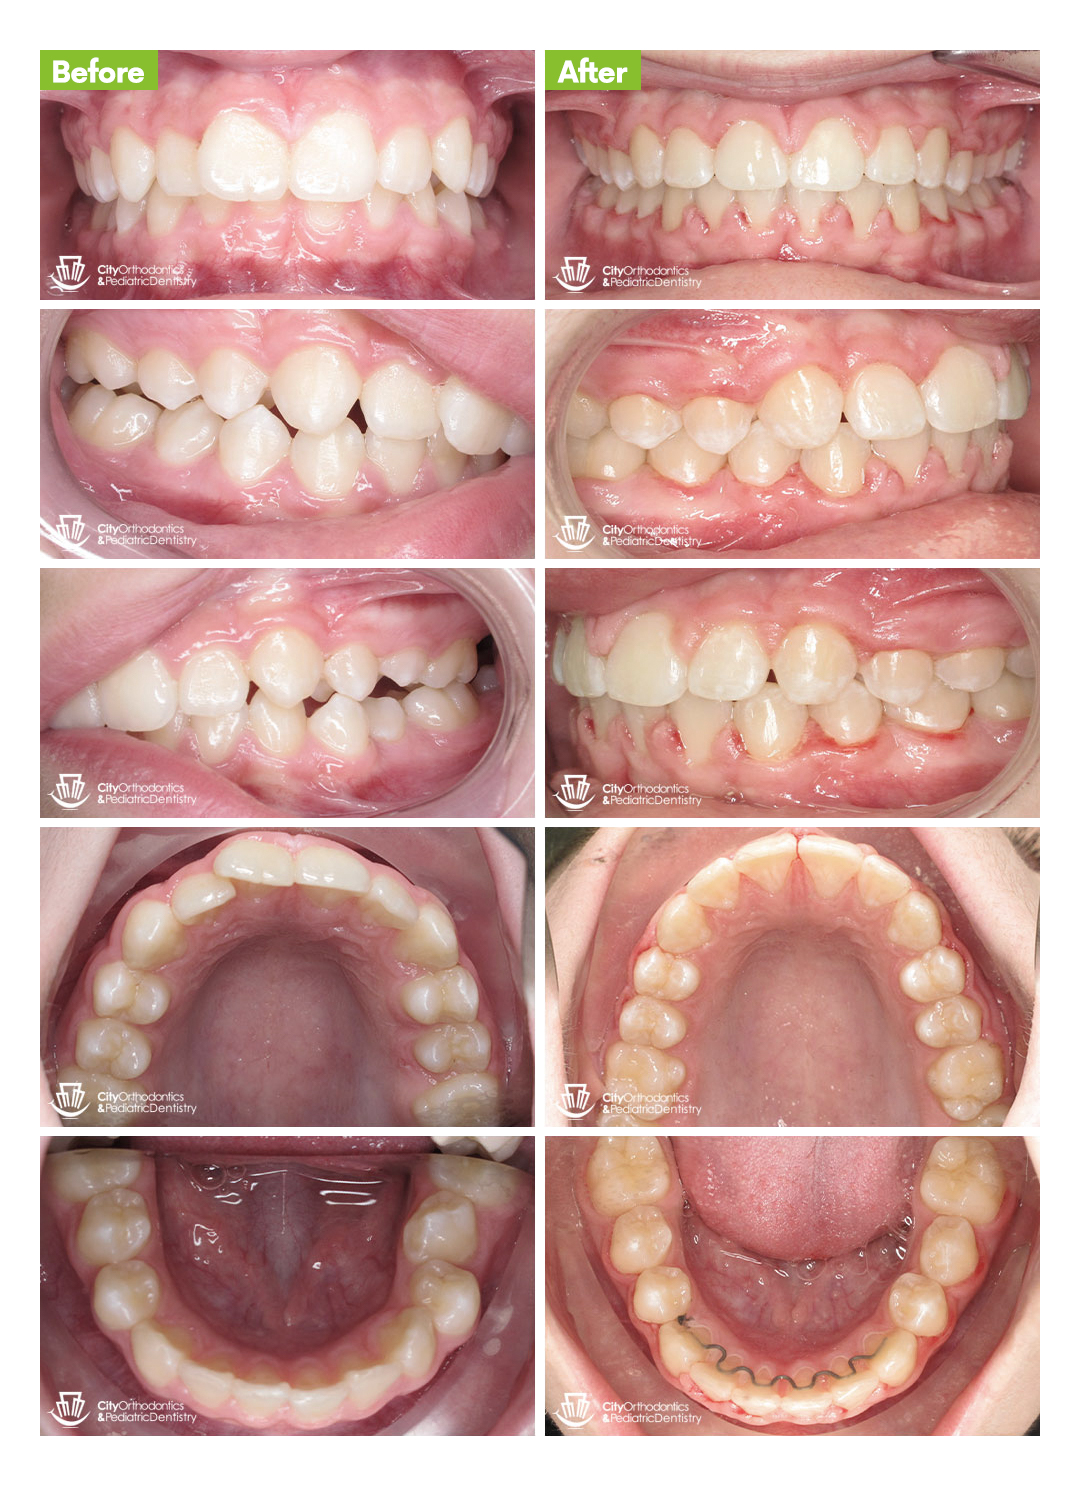 overbite before and after